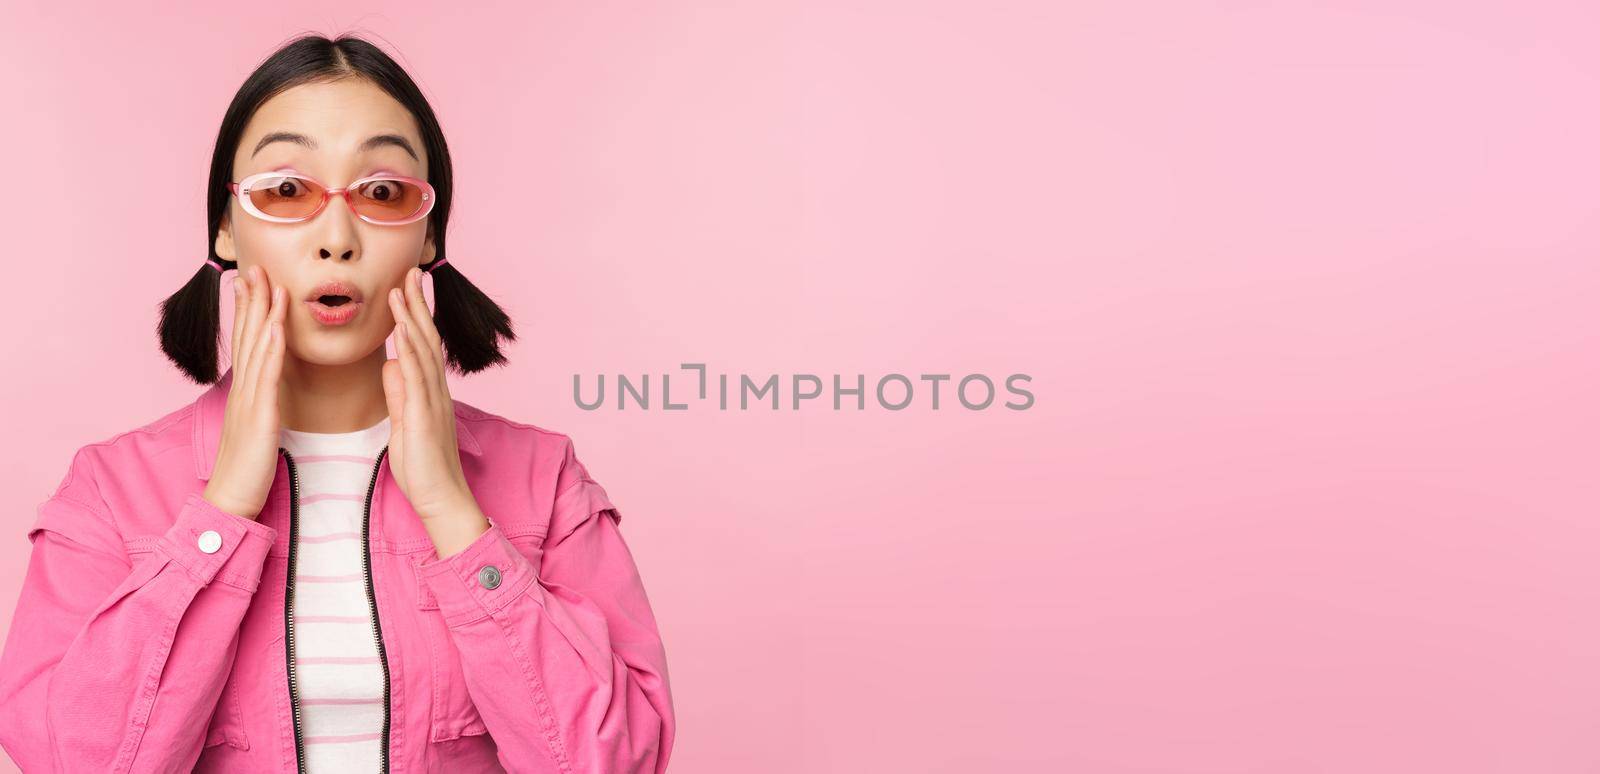 Image of asian girl looking surprised and excited, smiling, amazed reaction to big news, standing over pink background.